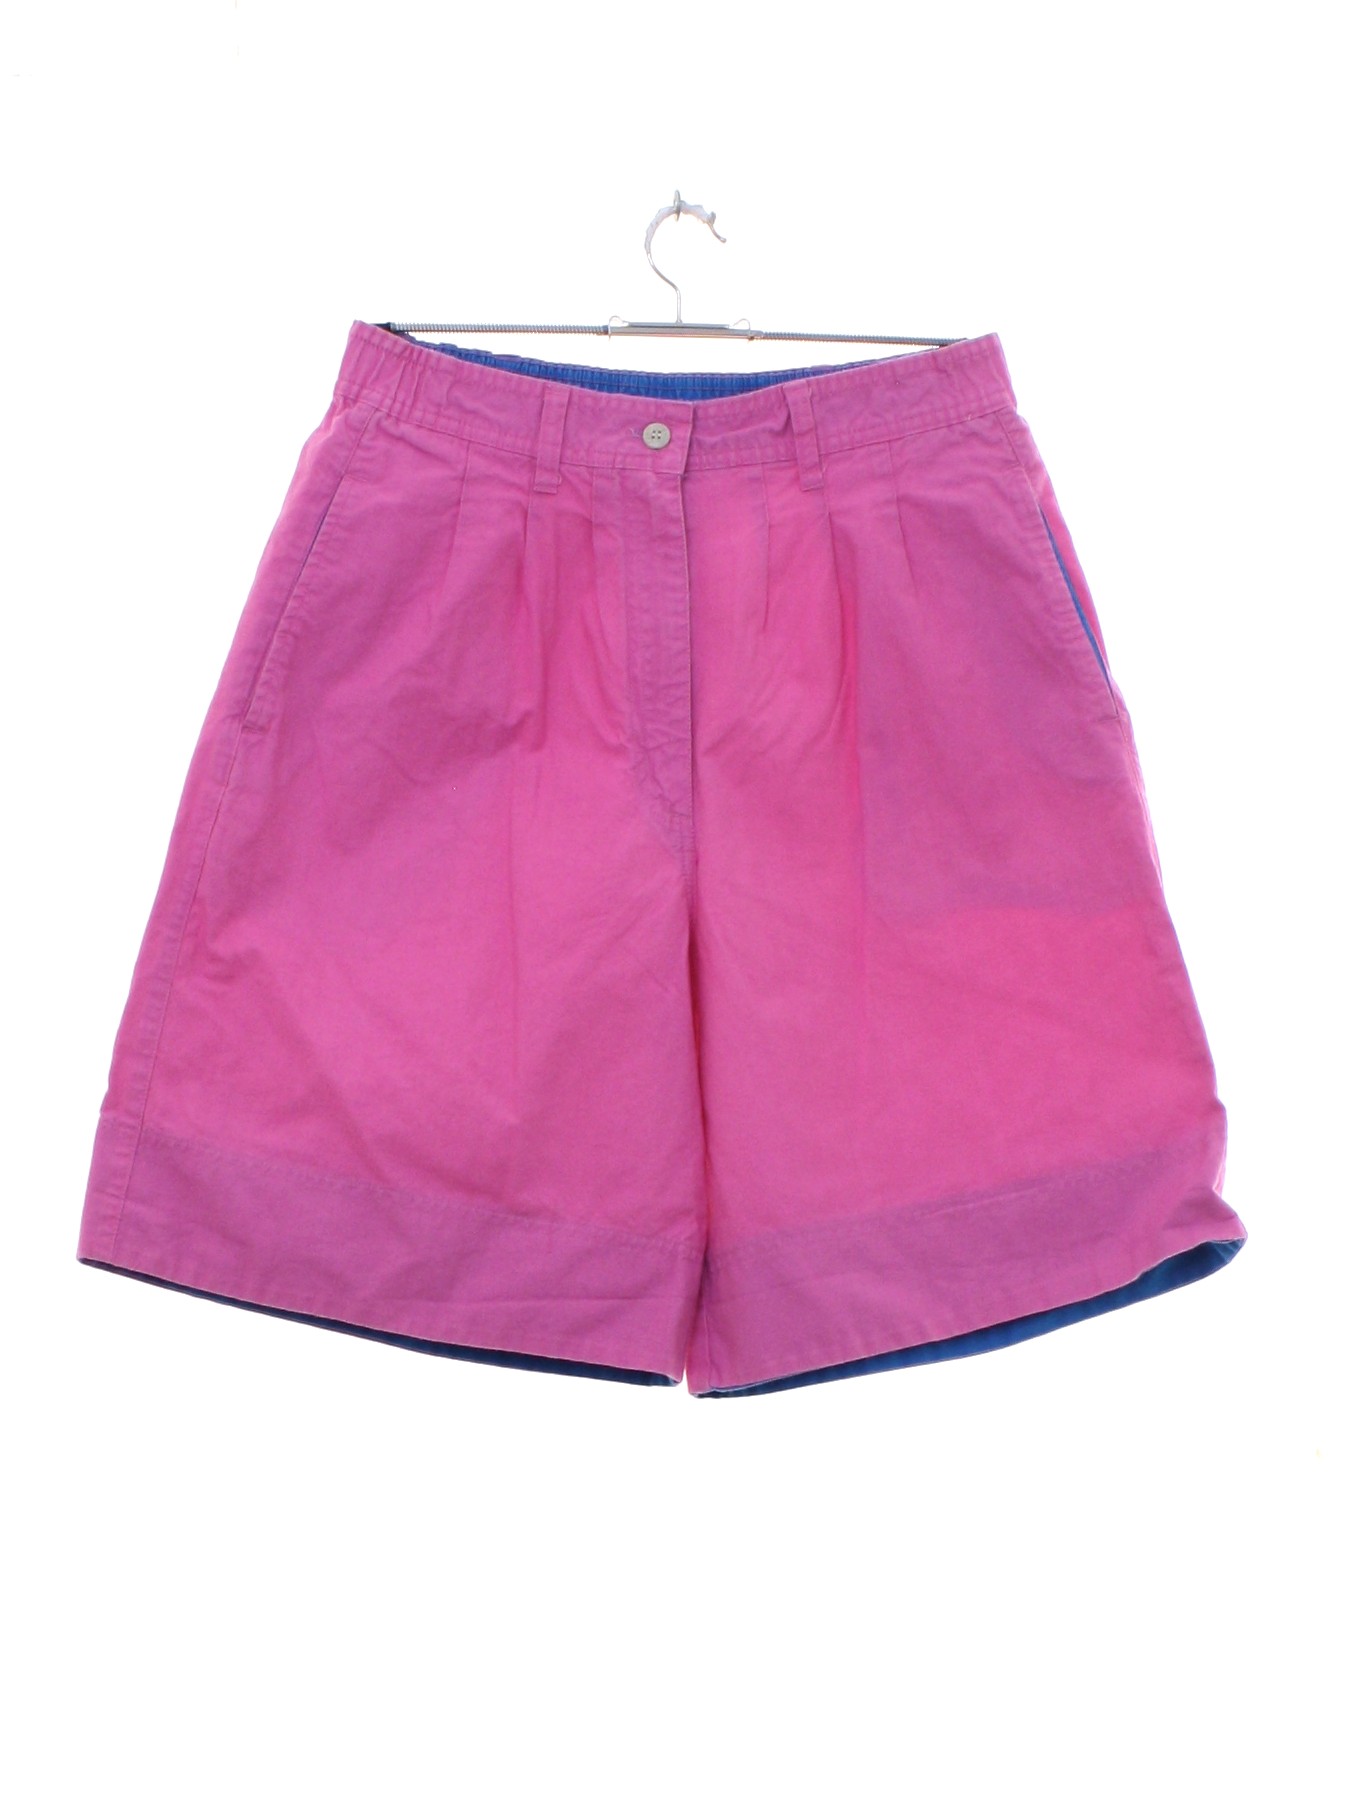 Retro 80's Shorts: 80s -Line-Up- Womens pink background cotton totally ...